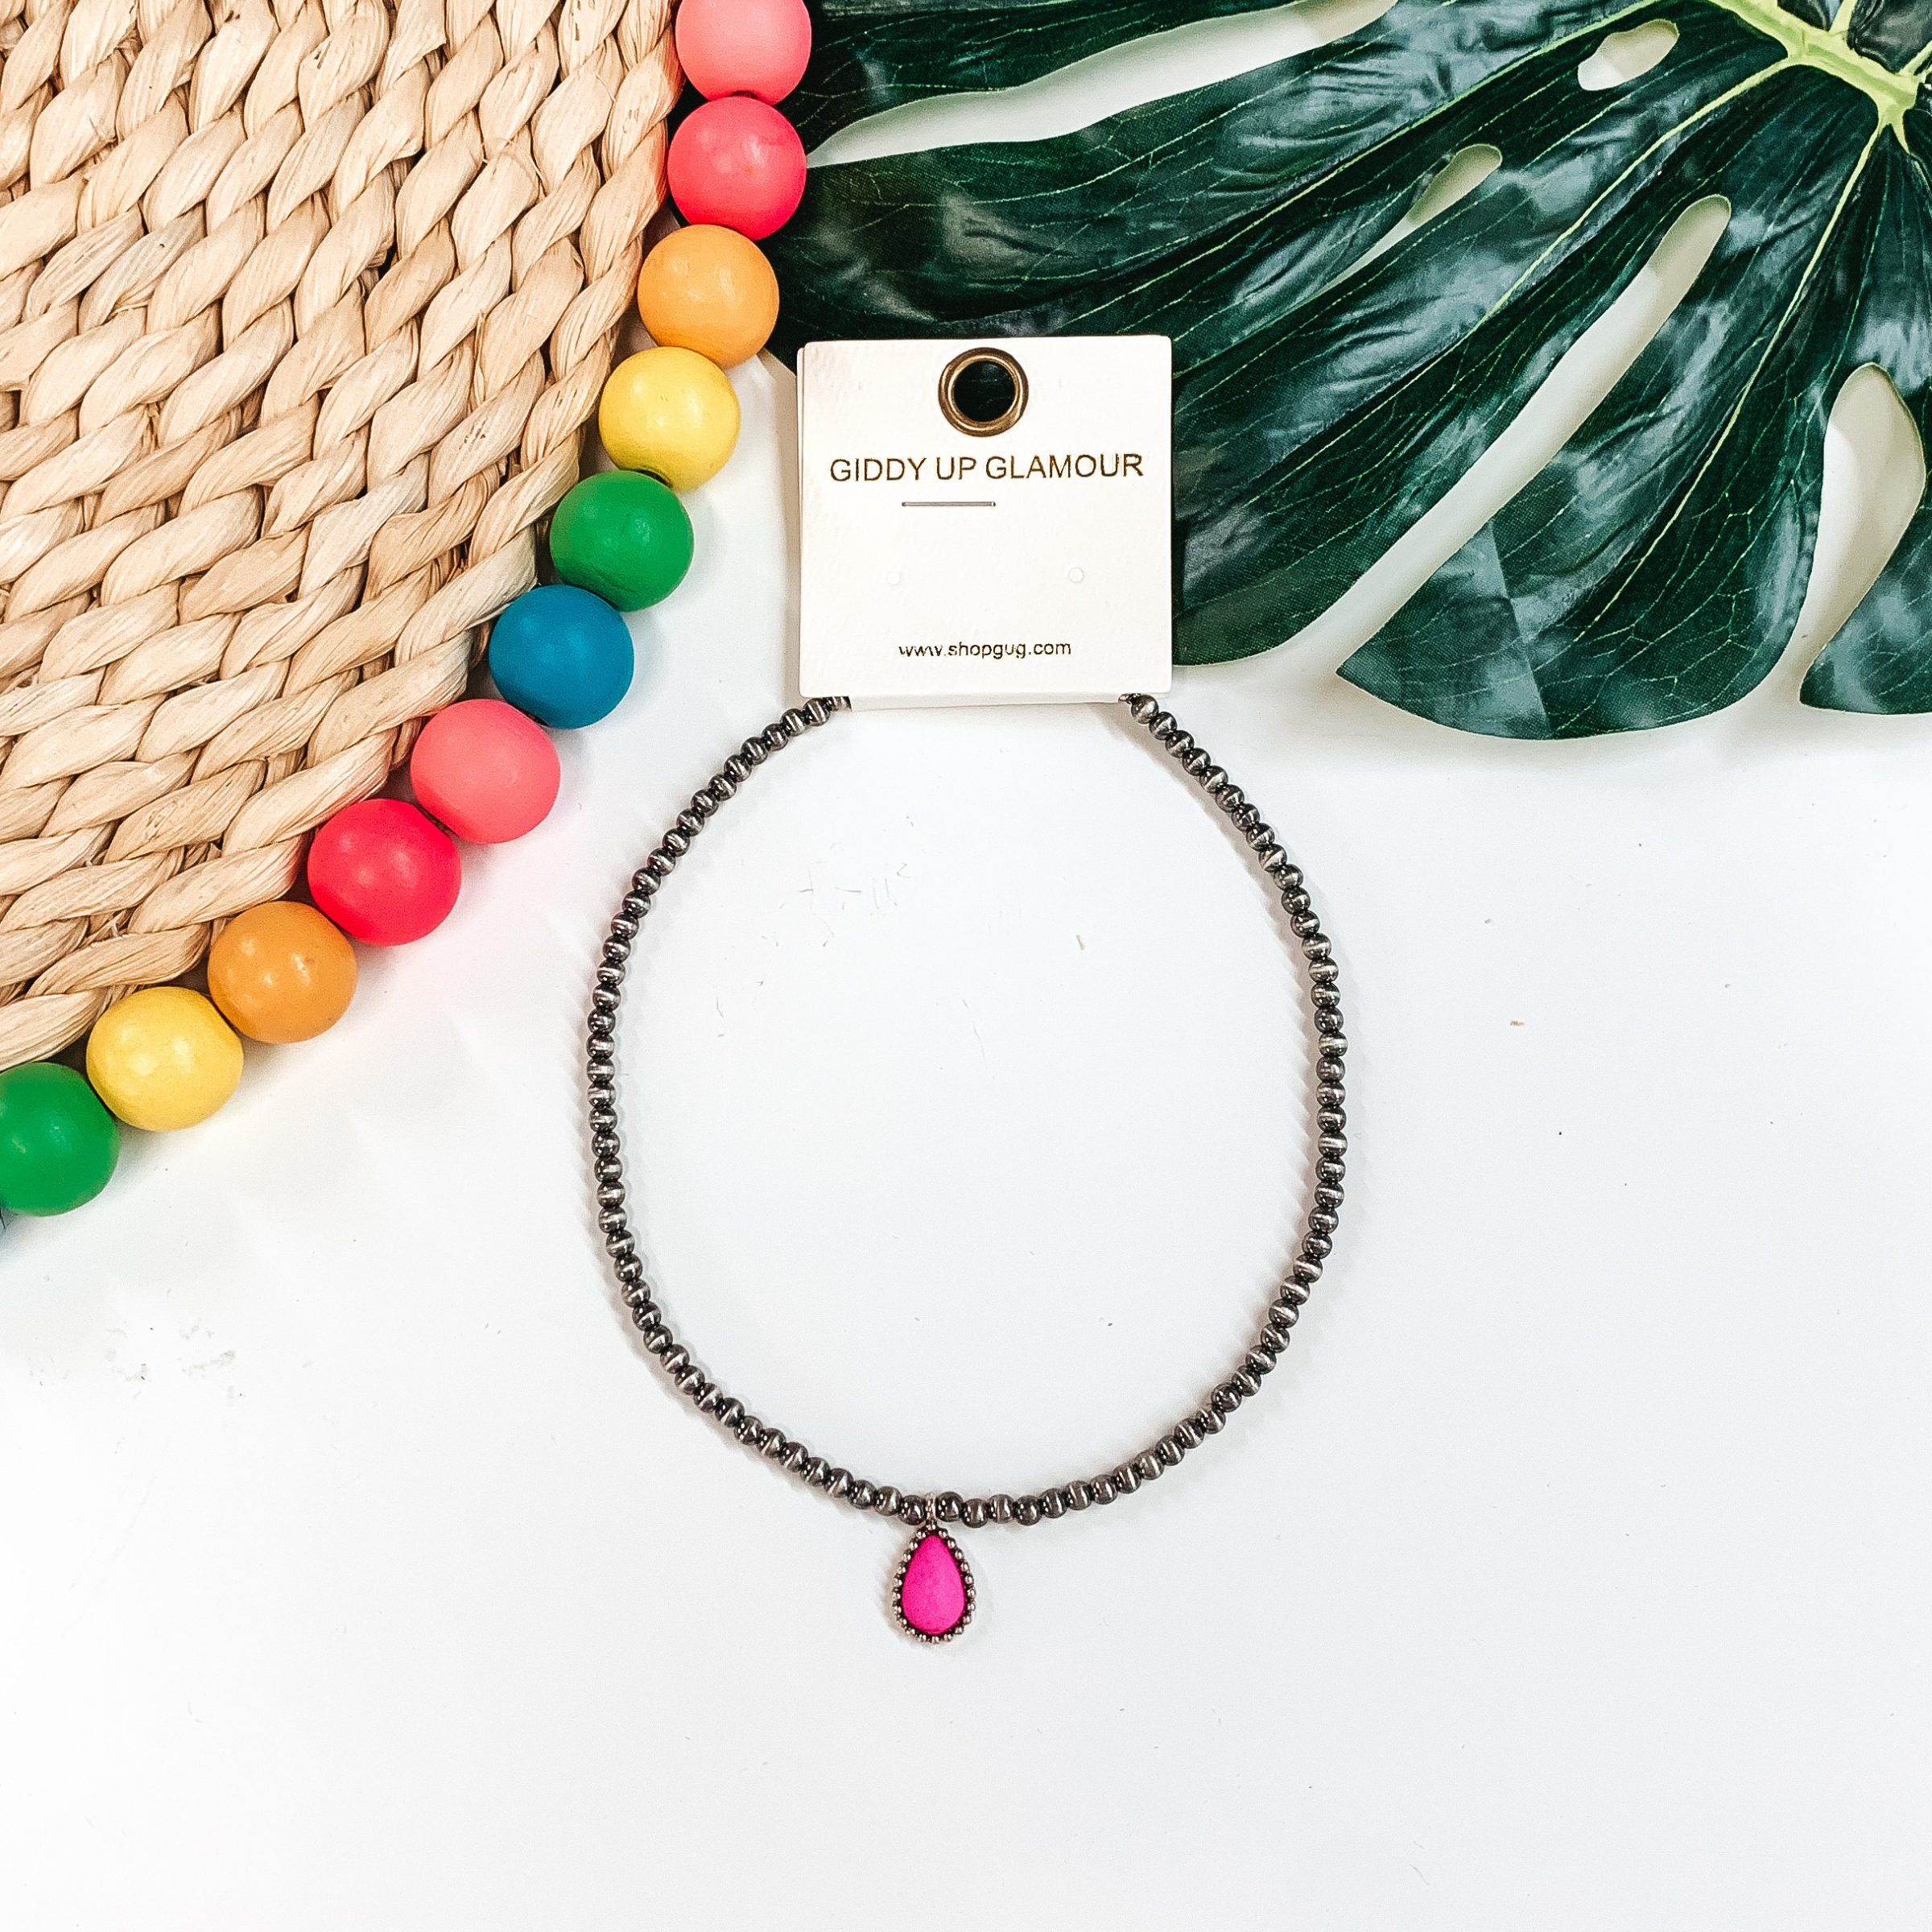 Navajo Inspired Choker with a Single Teardrop Stone in Pink - Giddy Up Glamour Boutique